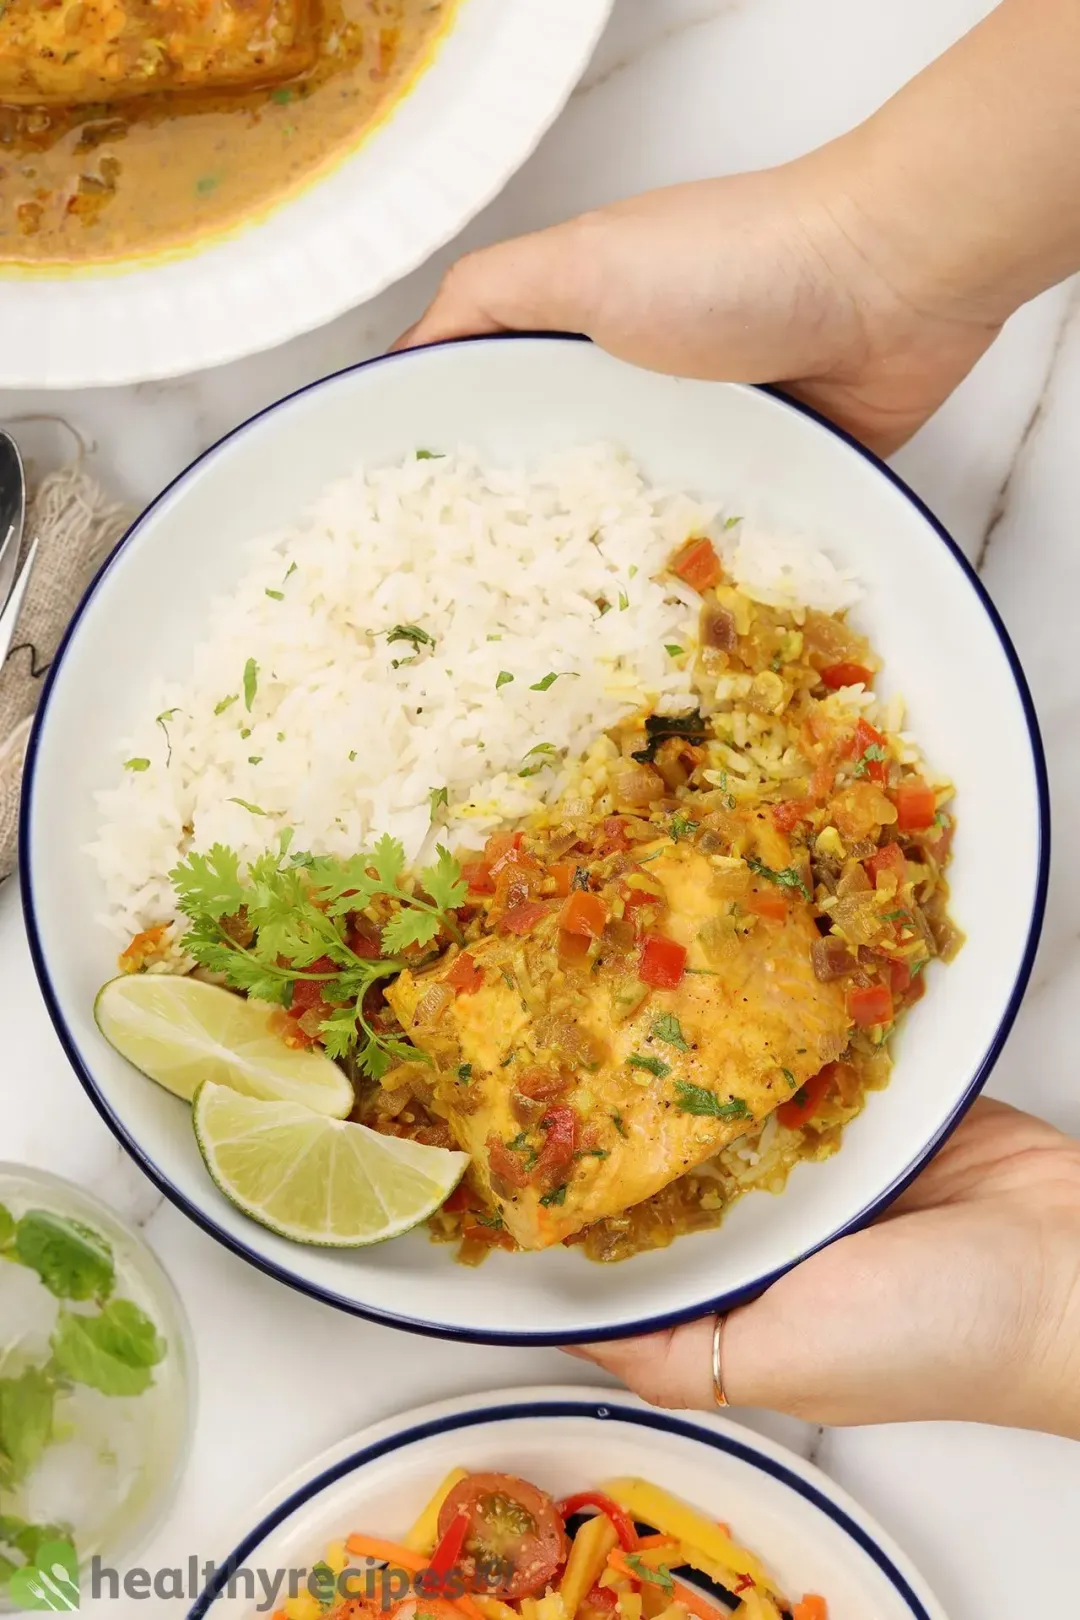 Two hands holding up a plate containing white rice, lime wedges, fresh coriander, a cooked salmon fillet covered in dark yellow curry and diced tomatoes